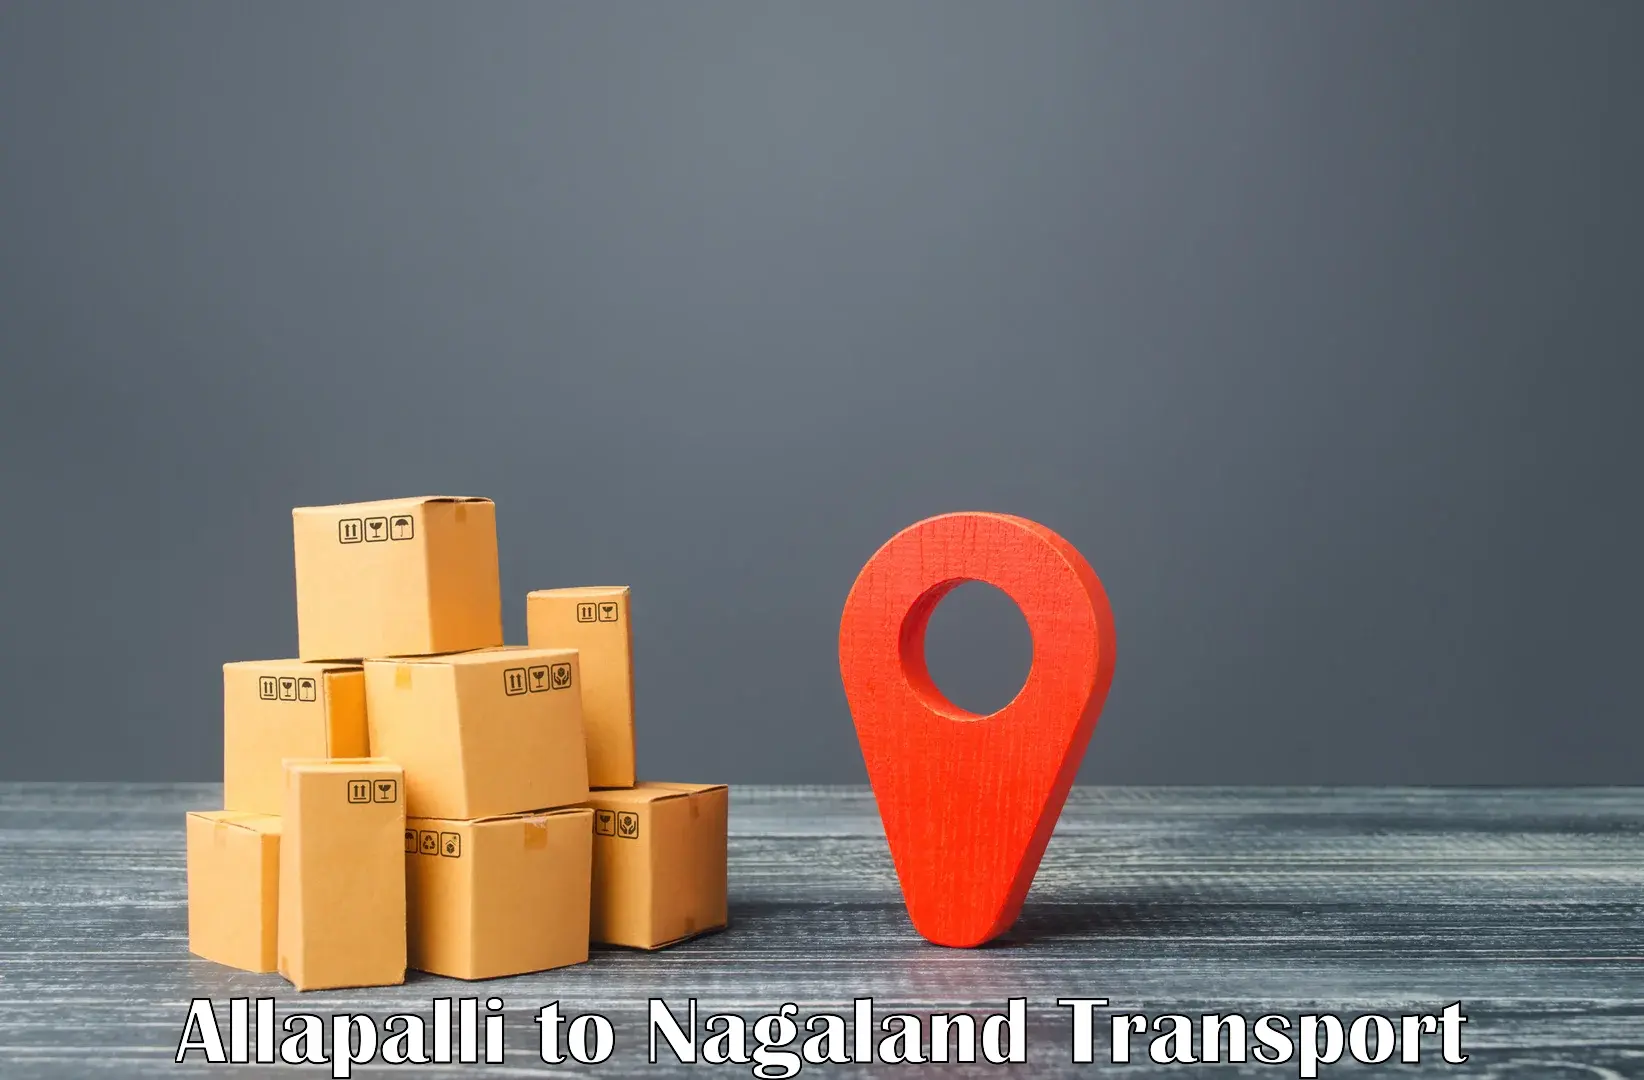 Two wheeler transport services Allapalli to Nagaland